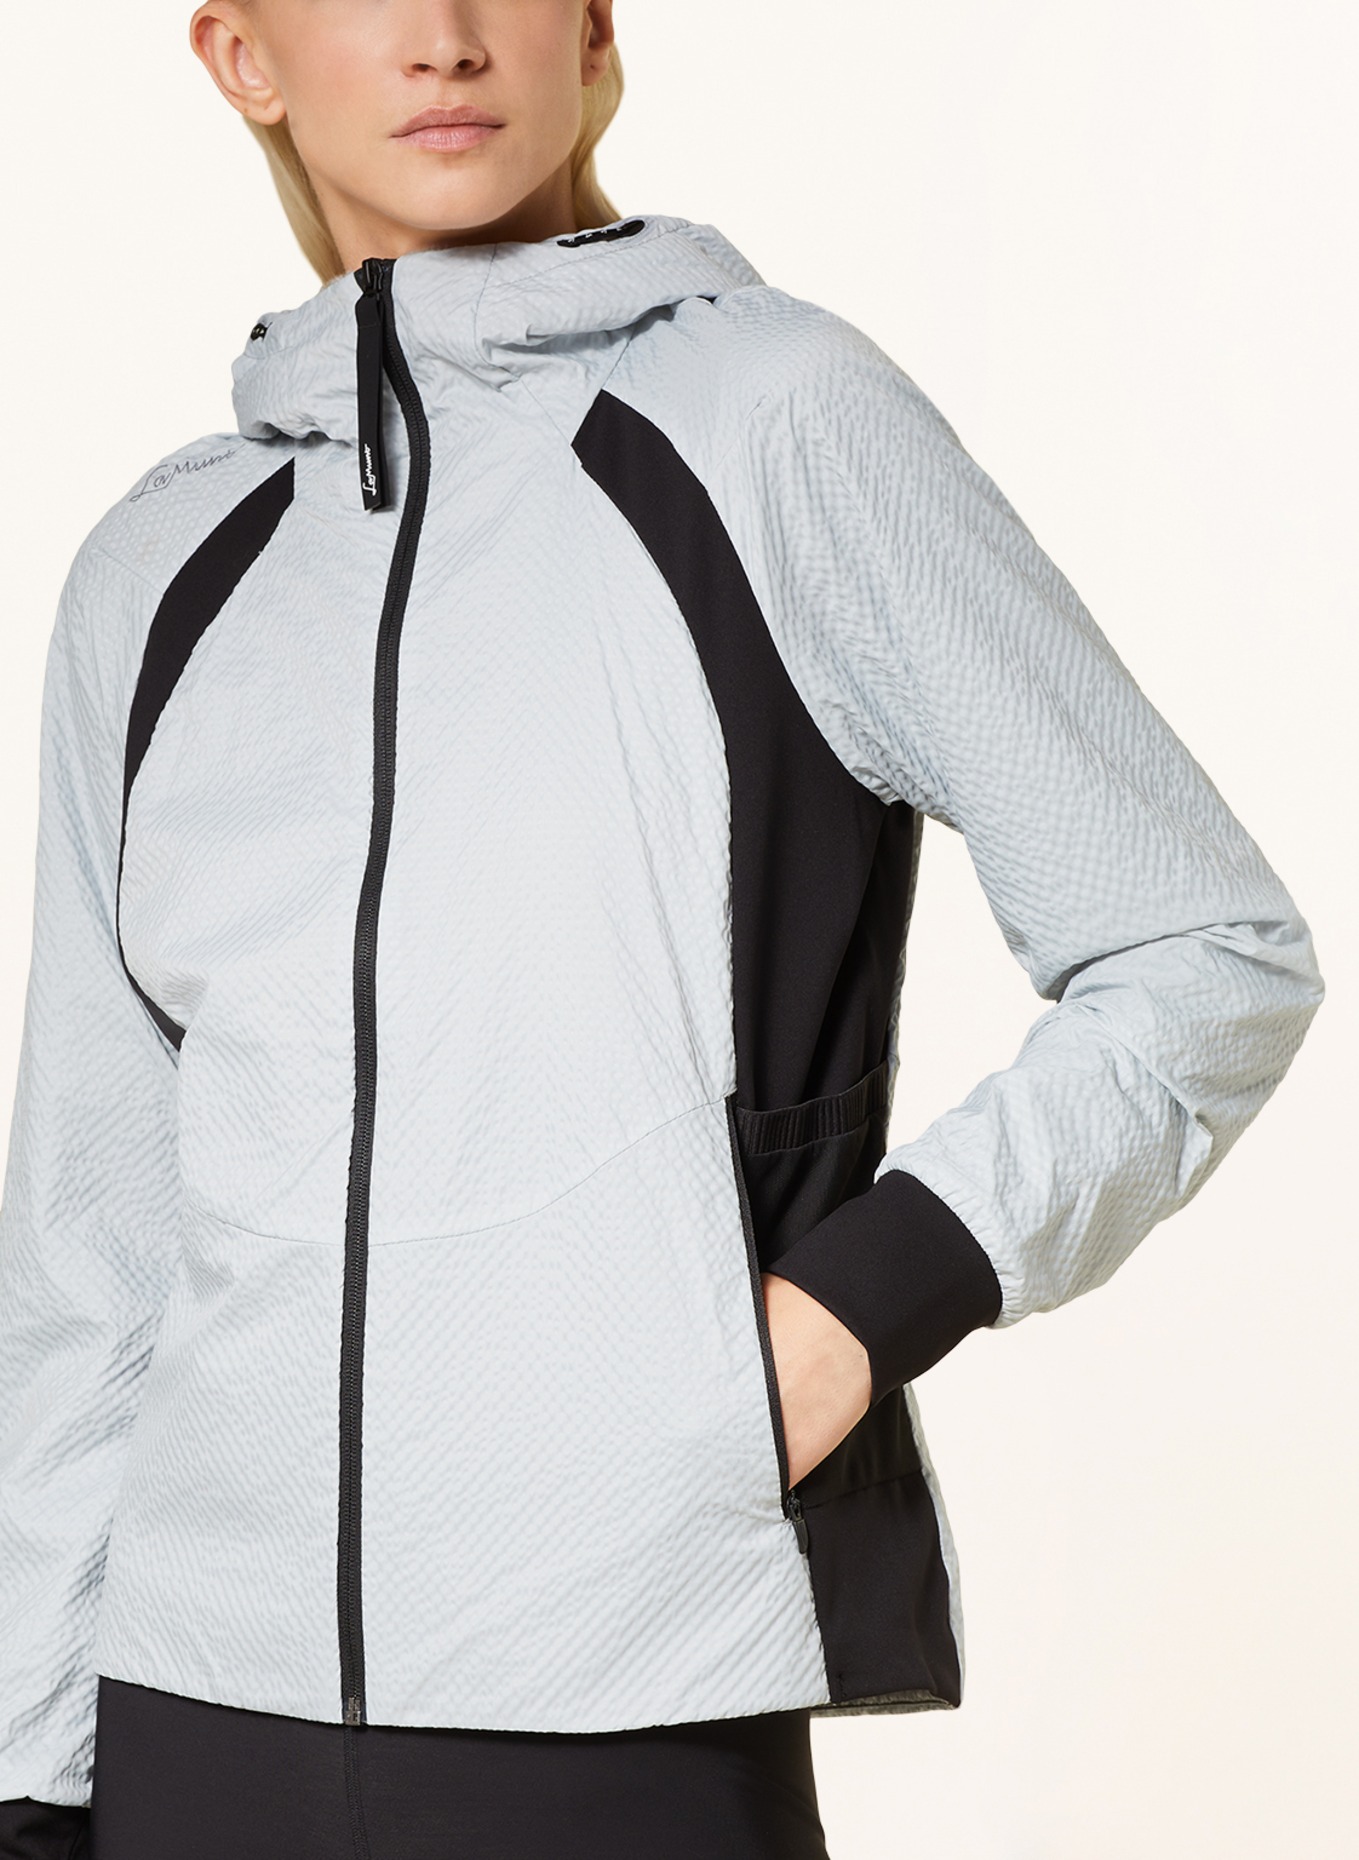 LaMunt Mid-layer jacket ALESSIA, Color: LIGHT GRAY (Image 5)